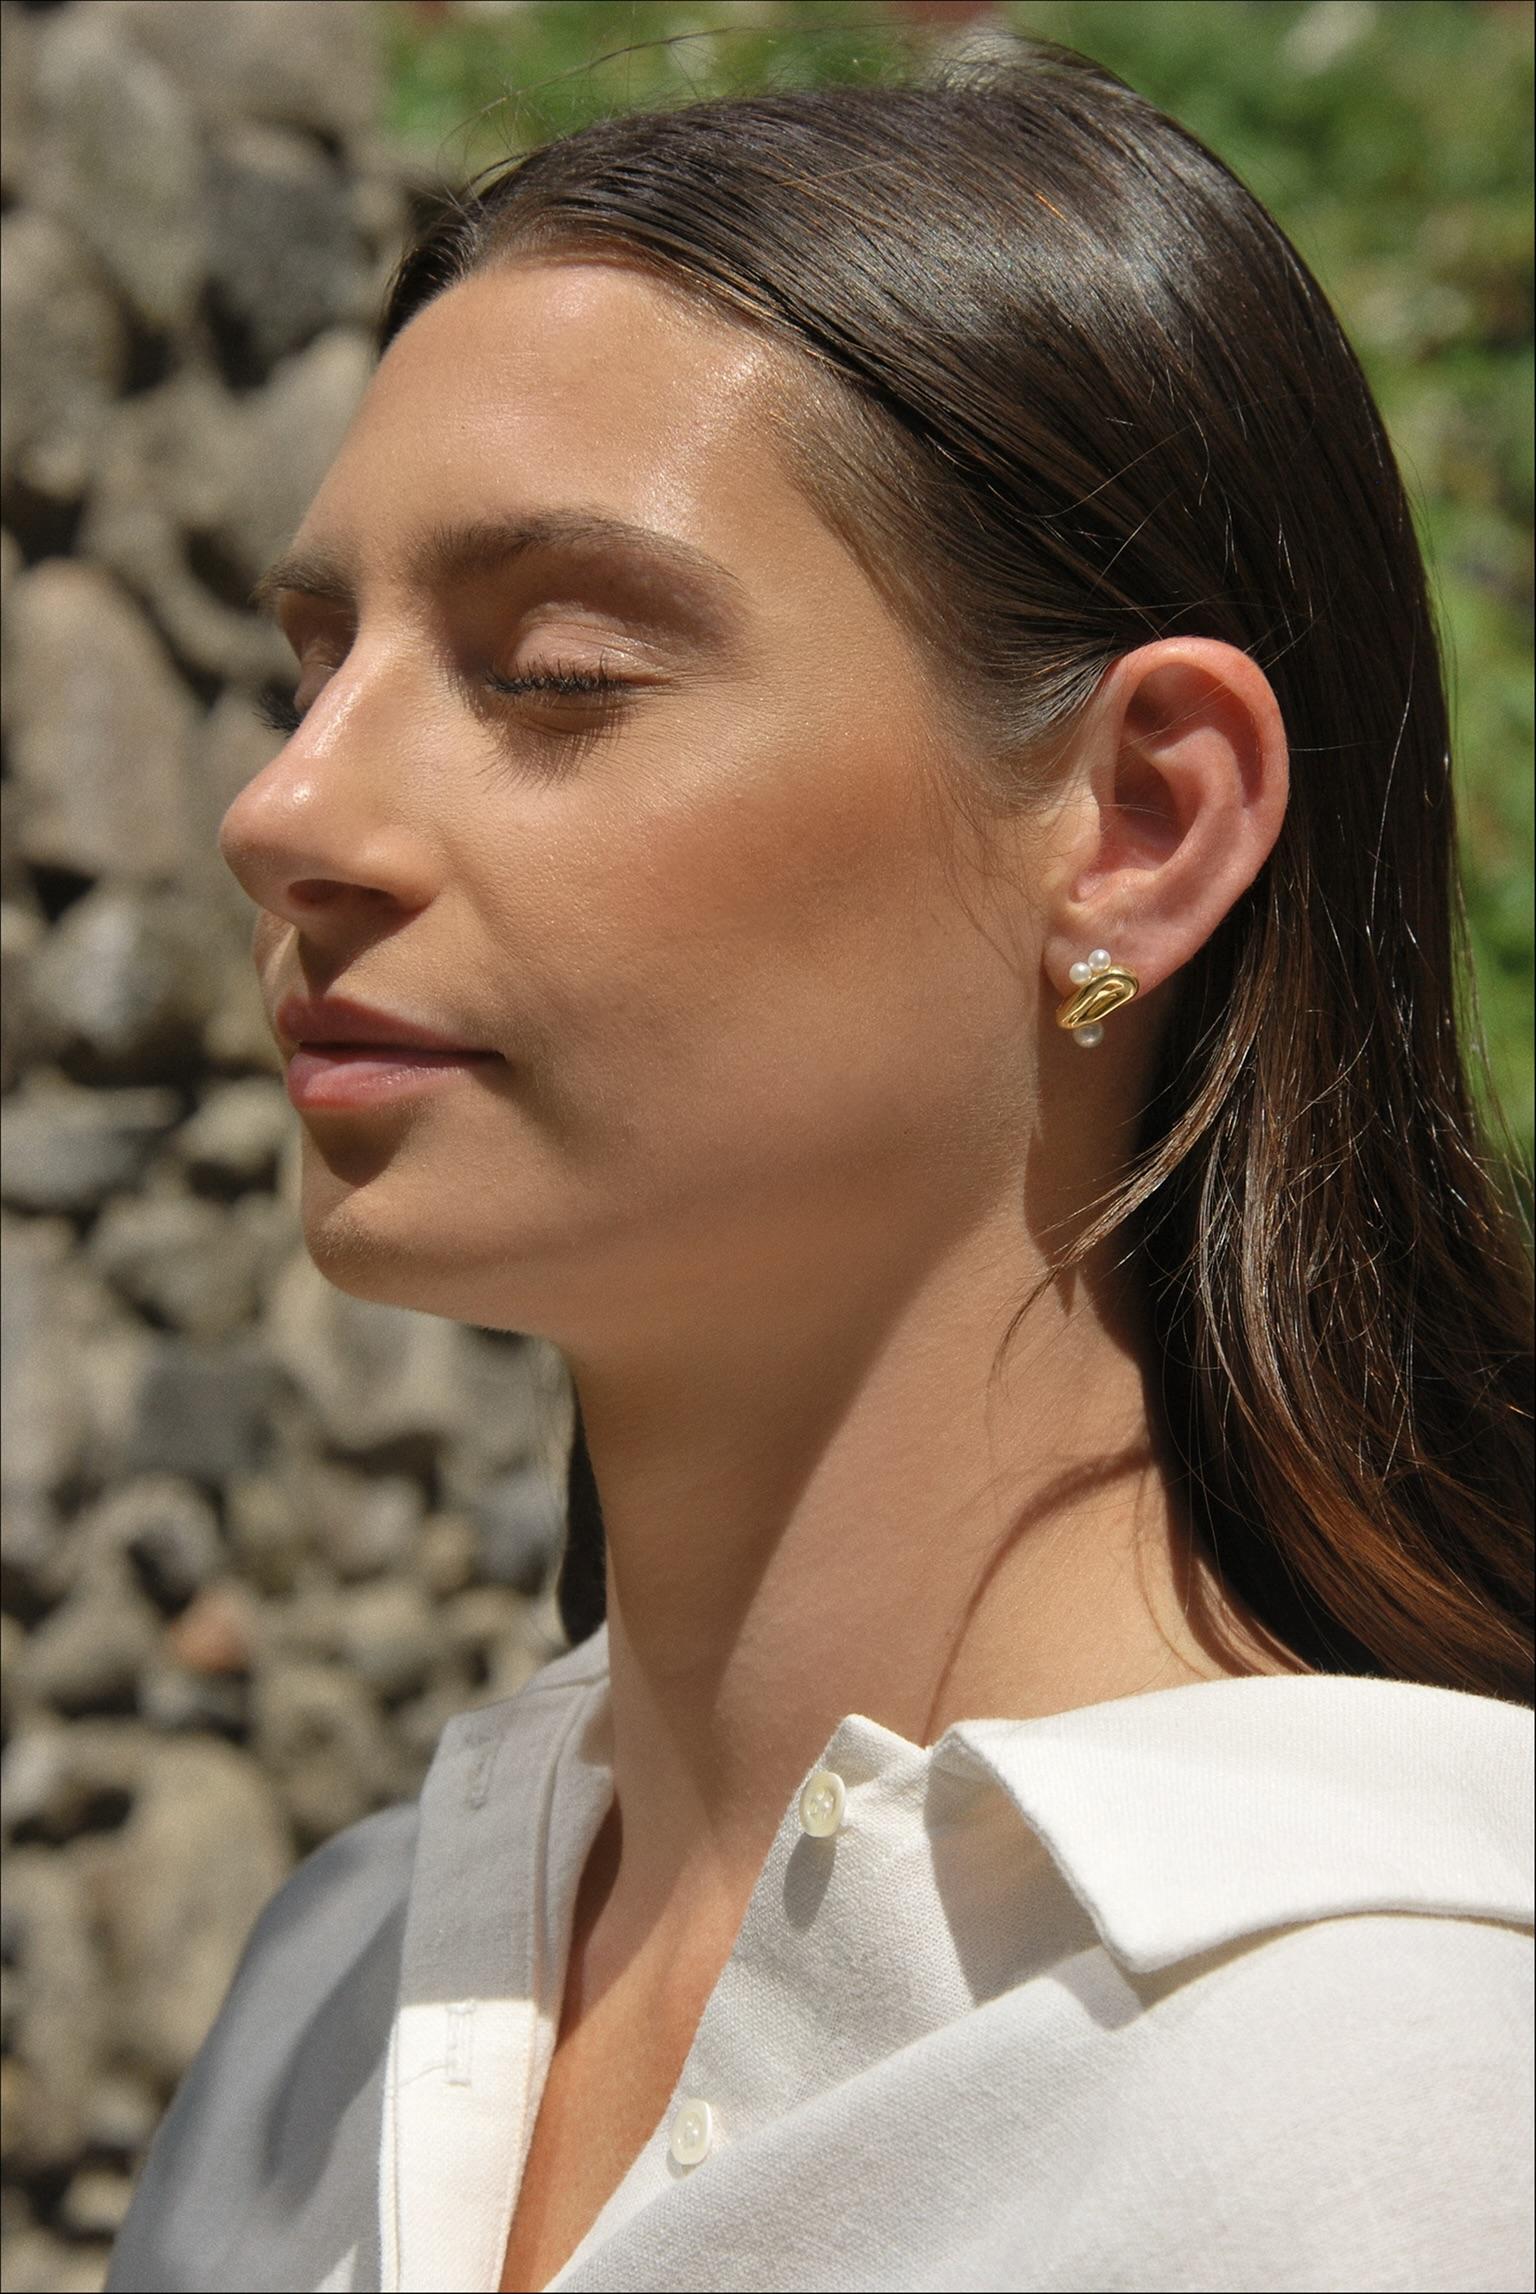 Understated elegance is finally here with a fresh take on classic pearls for the summer. The Paloma Studs are handcrafted with freshwater pearls and organic gold shapes. Take this set from the sun-kissed days to salty summer nights. Made with Plated